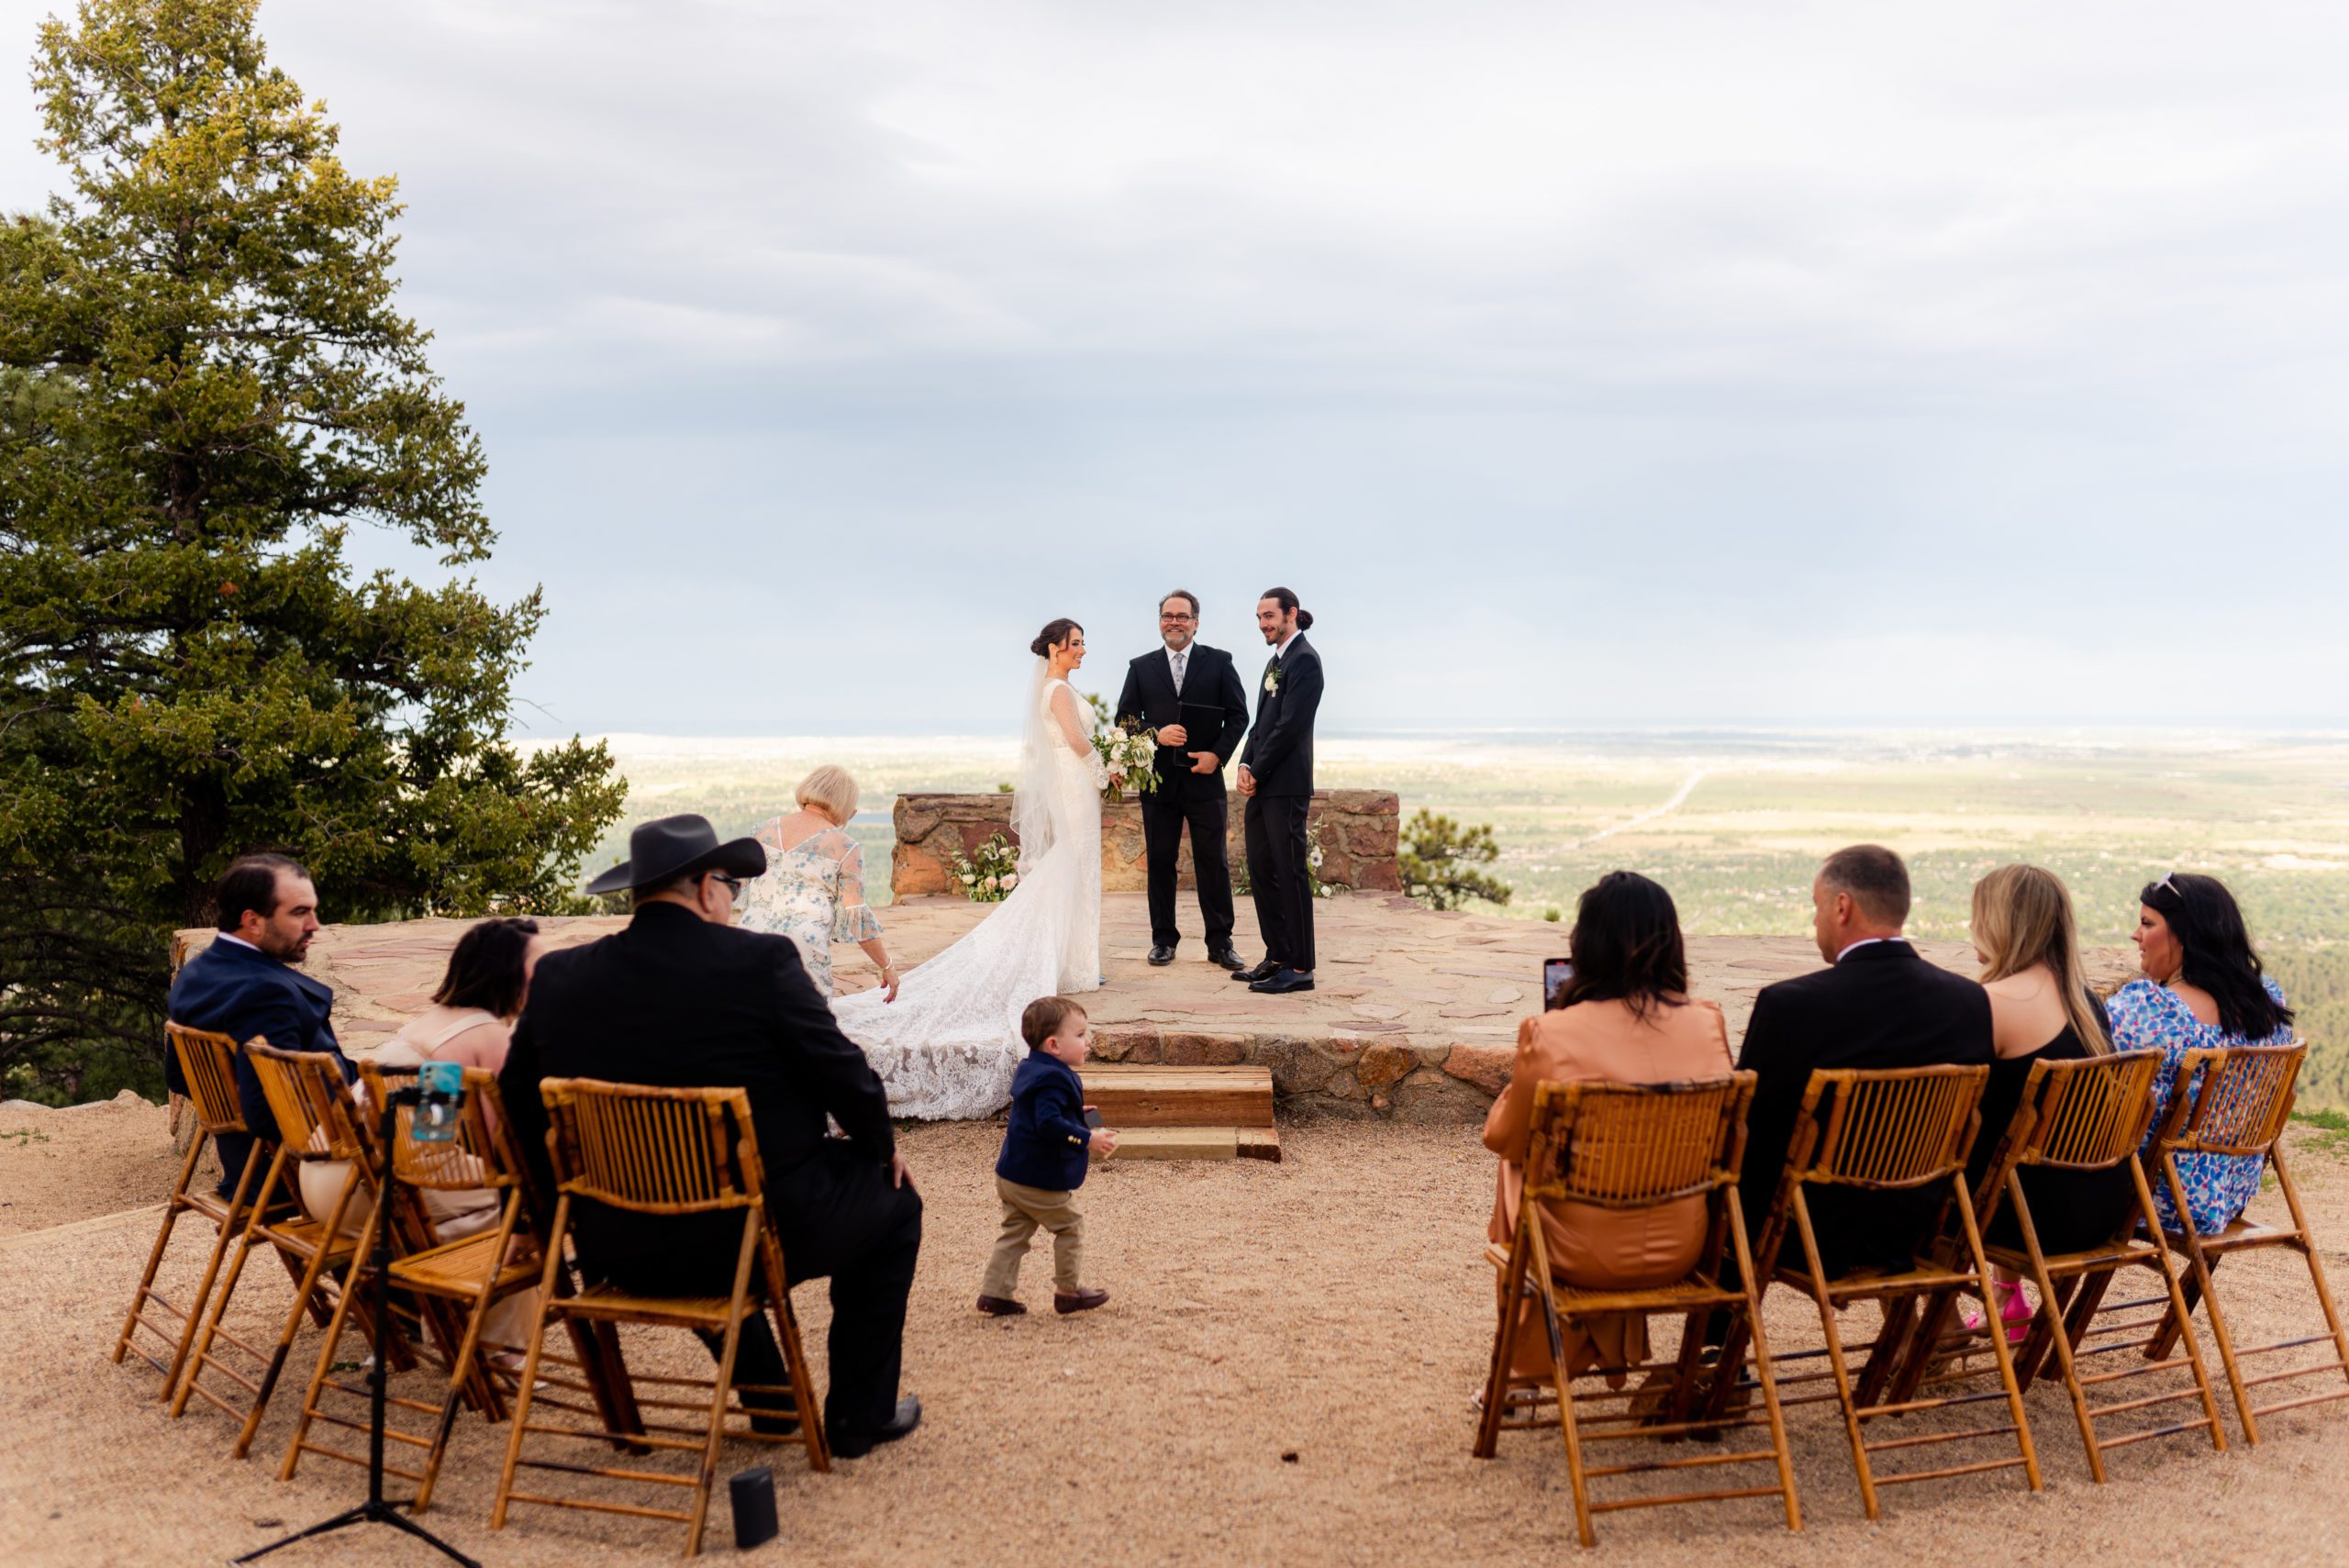 The Bride and Groom's Intimate Elopement Ceremony at Sunrise Amphitheater 